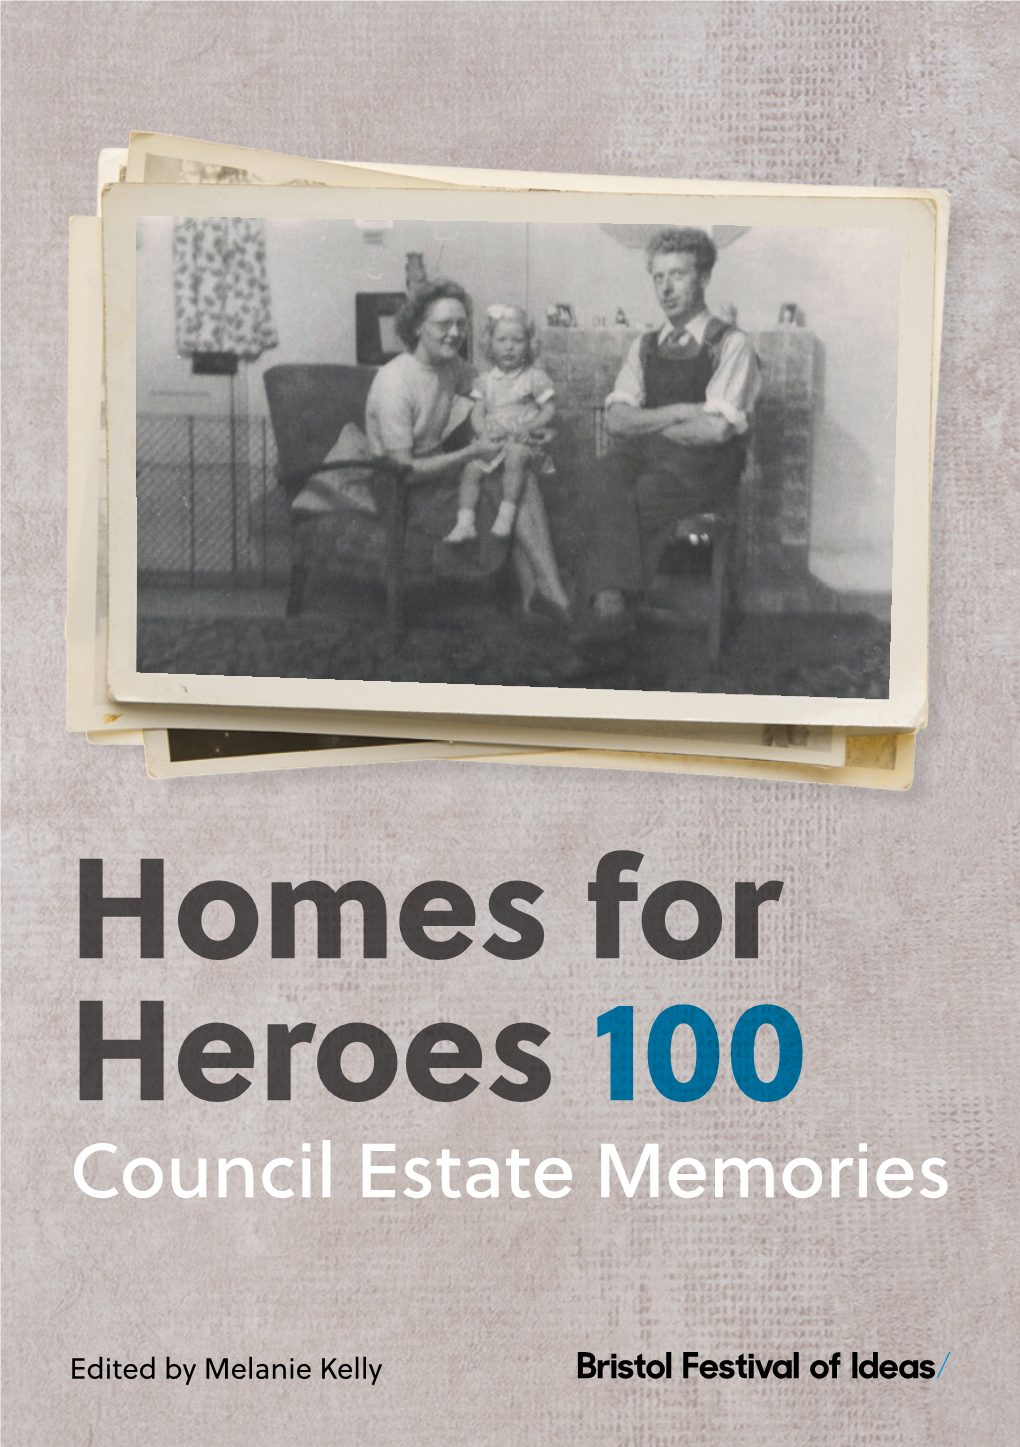 Homes for Heroes 100 Council Estate Memories